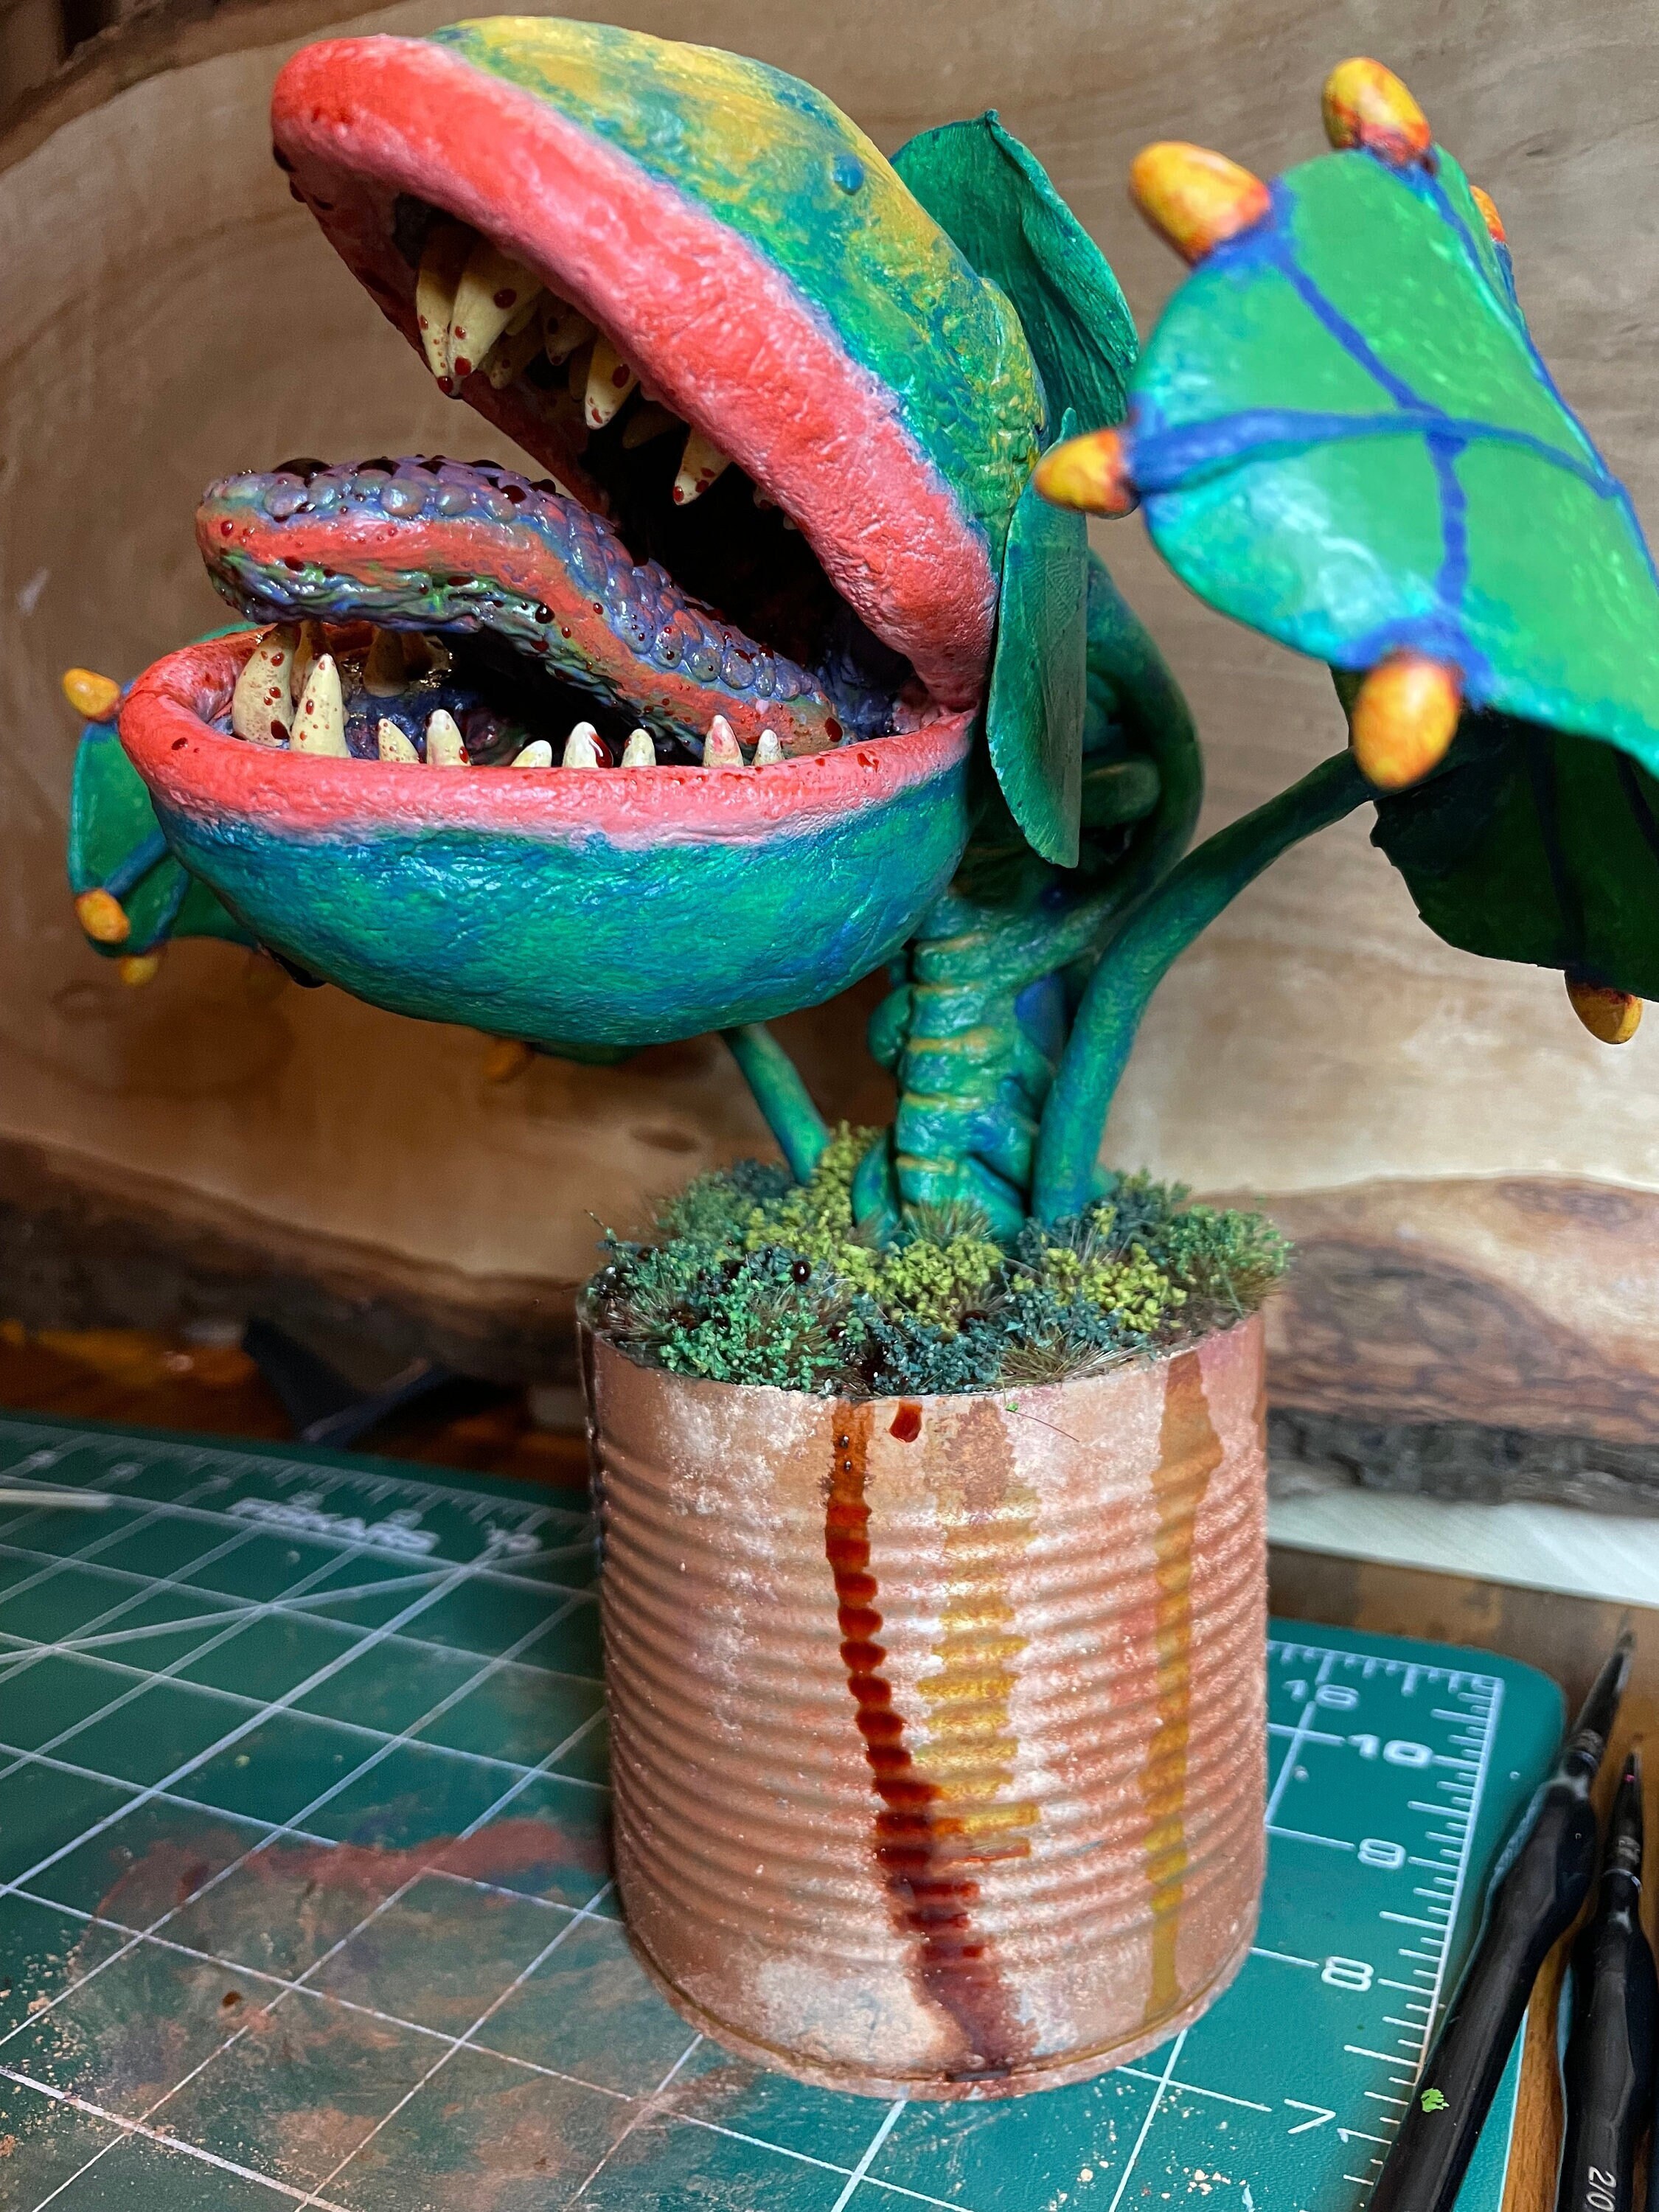 I made an Audrey2 from Little shop of Horrors using styrofoam eggs